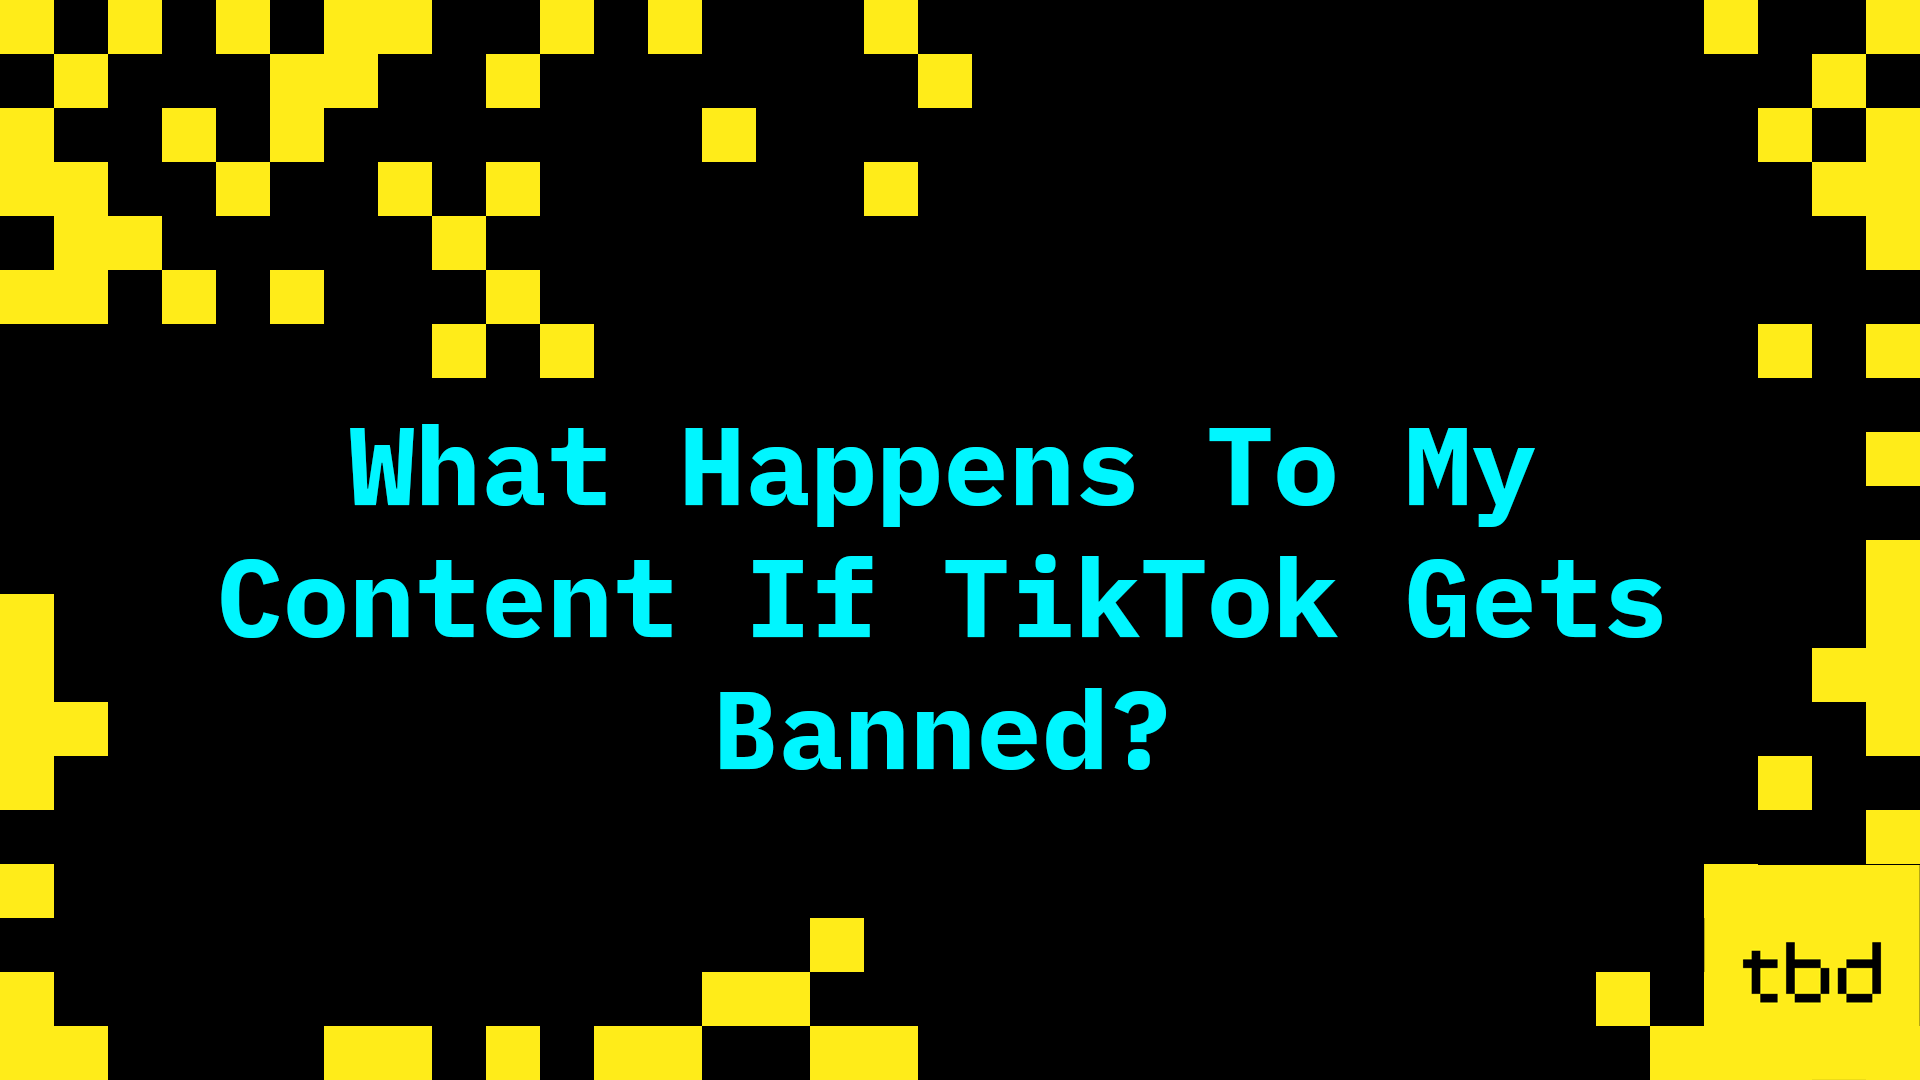 What Happens To My Content If TikTok Gets Banned?